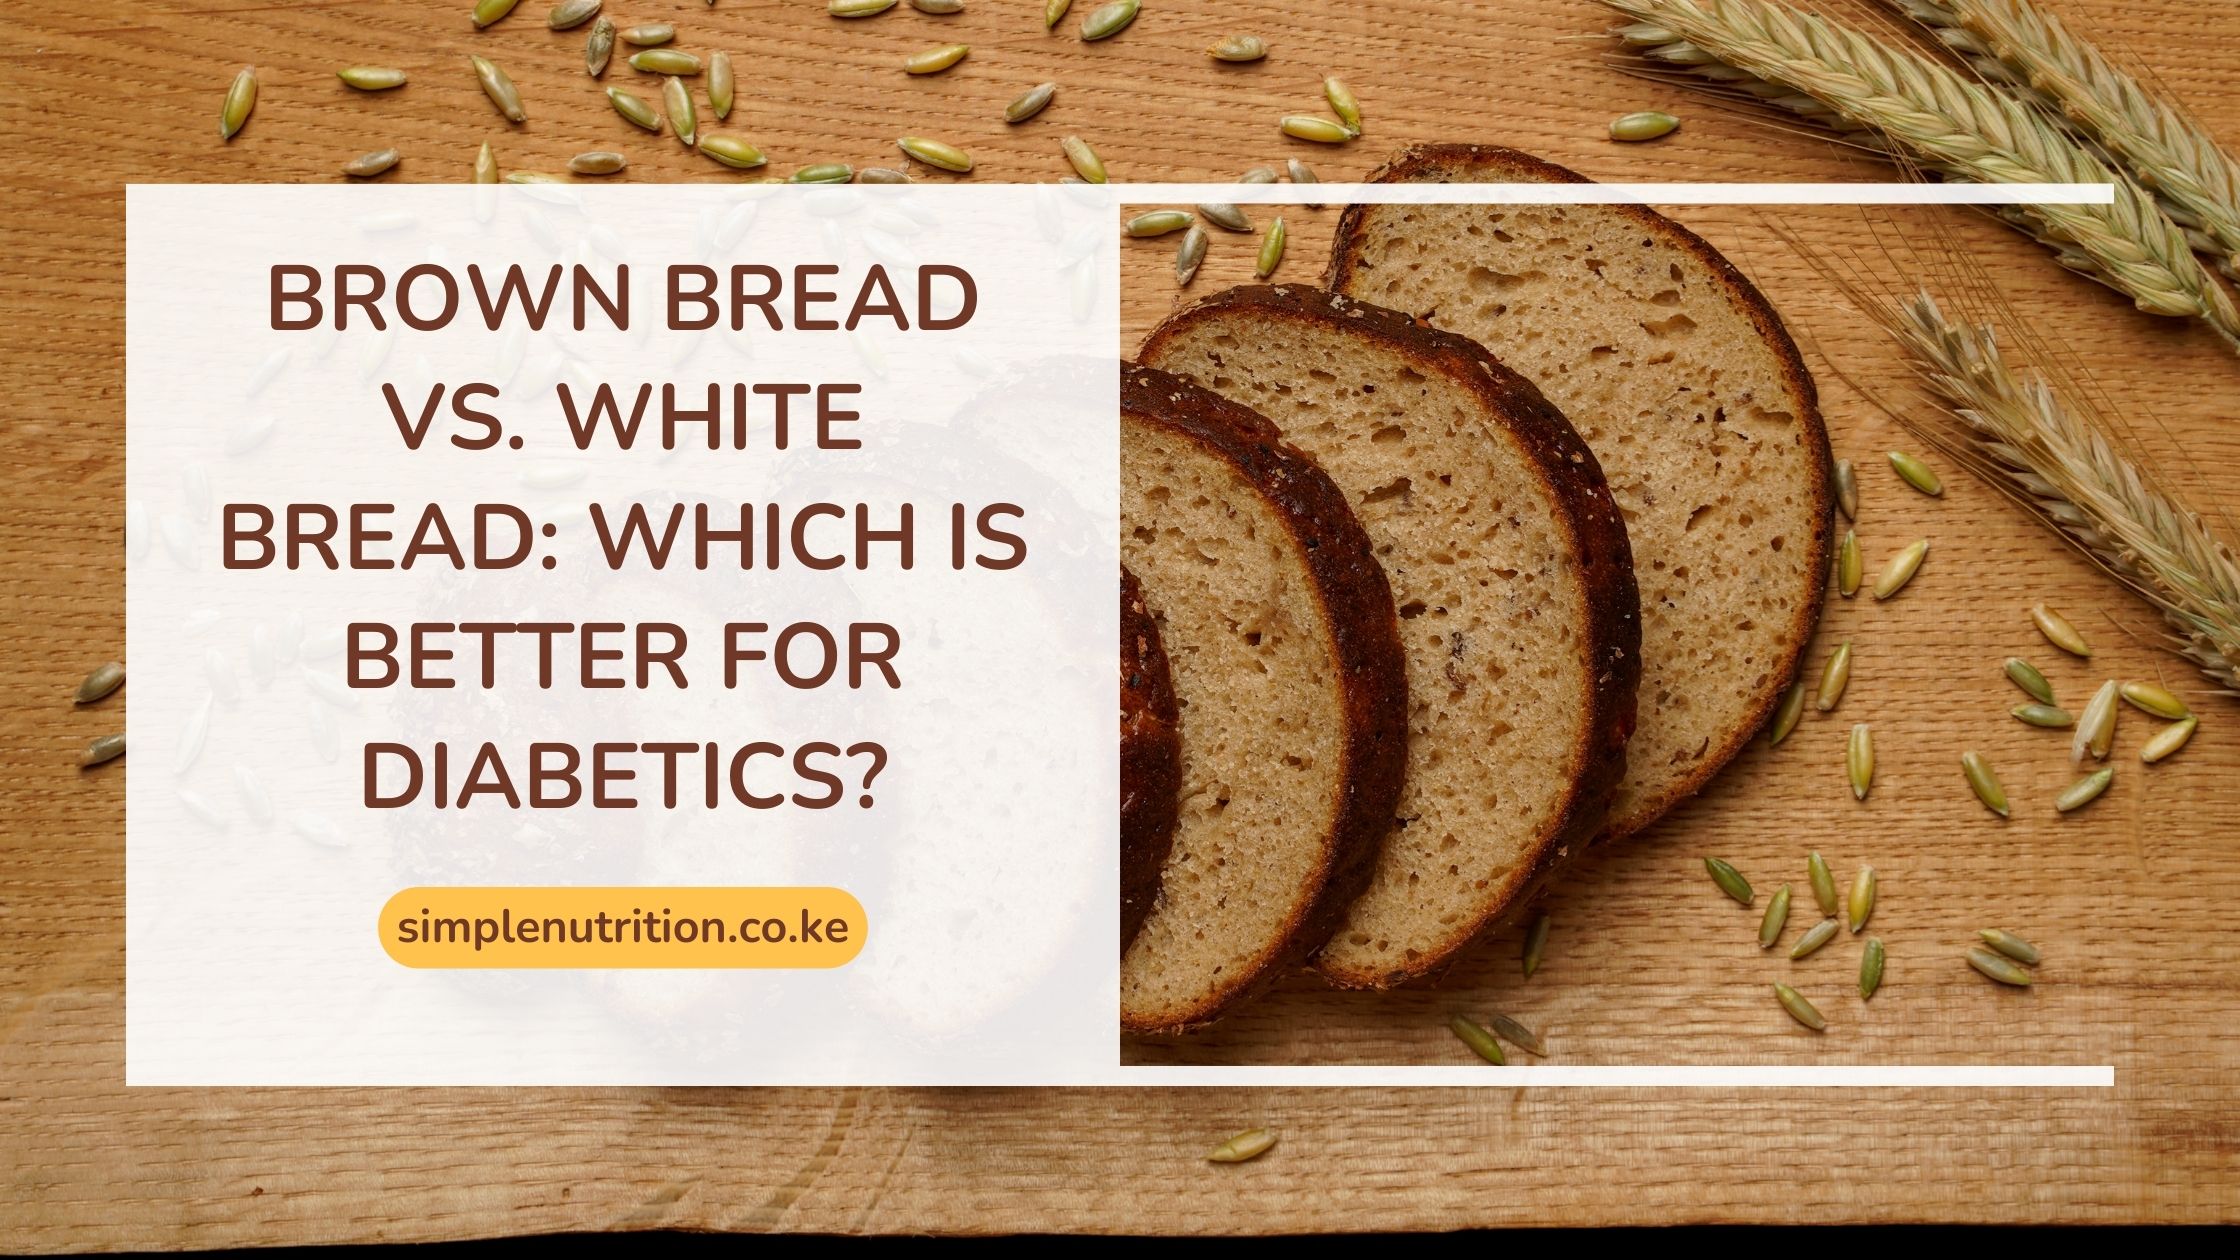 Brown bread vs. White Bread: Which is Better for Diabetics?